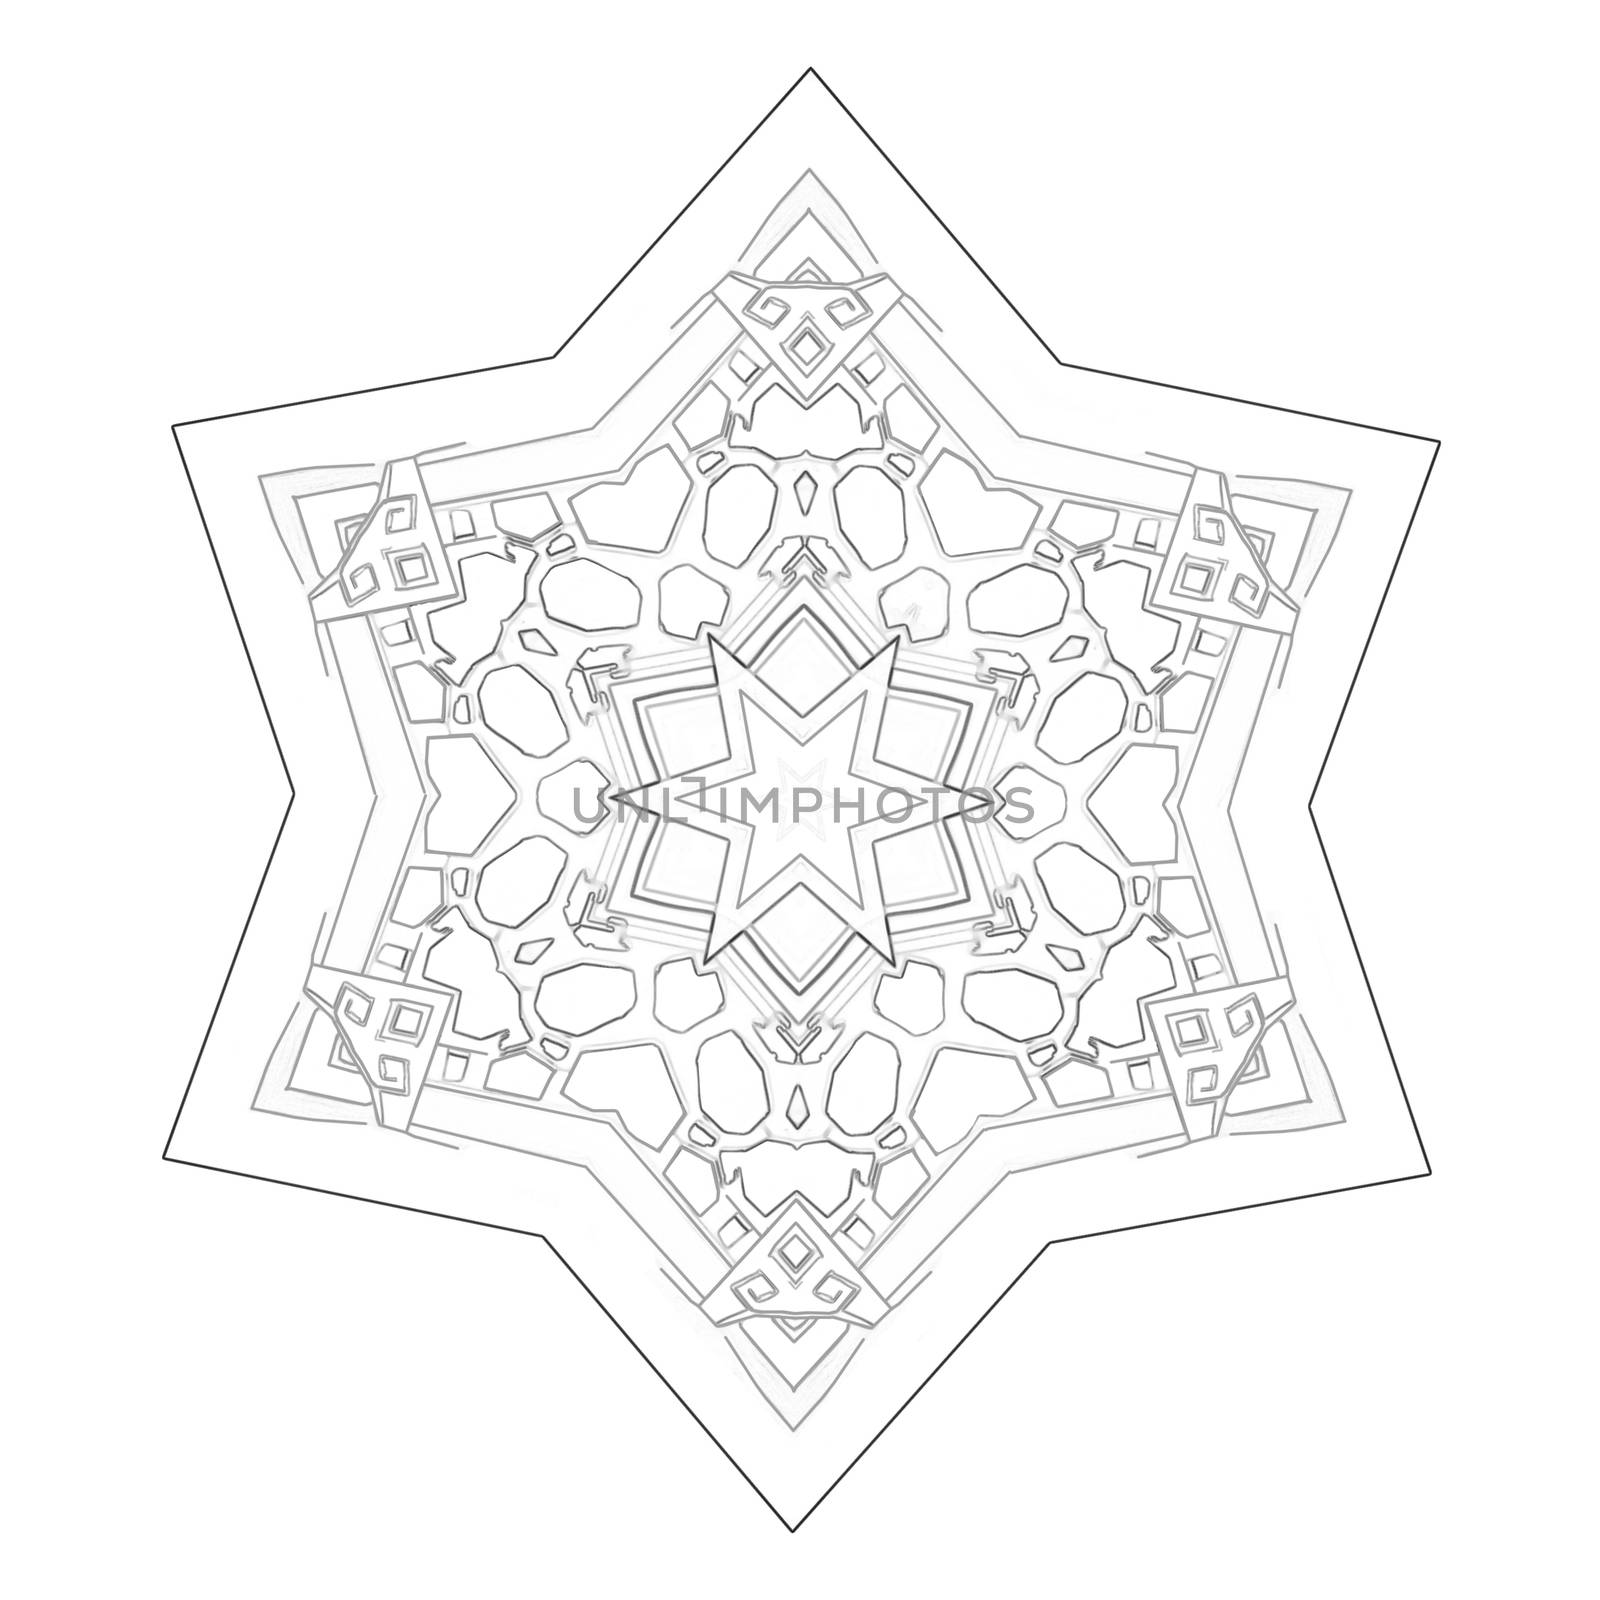 Illustration: Coloring Book Series: Hexagram Flower. Soft line. Print it and bring it to Life with Color! Fantastic Outline / Sketch / Line Art Design.